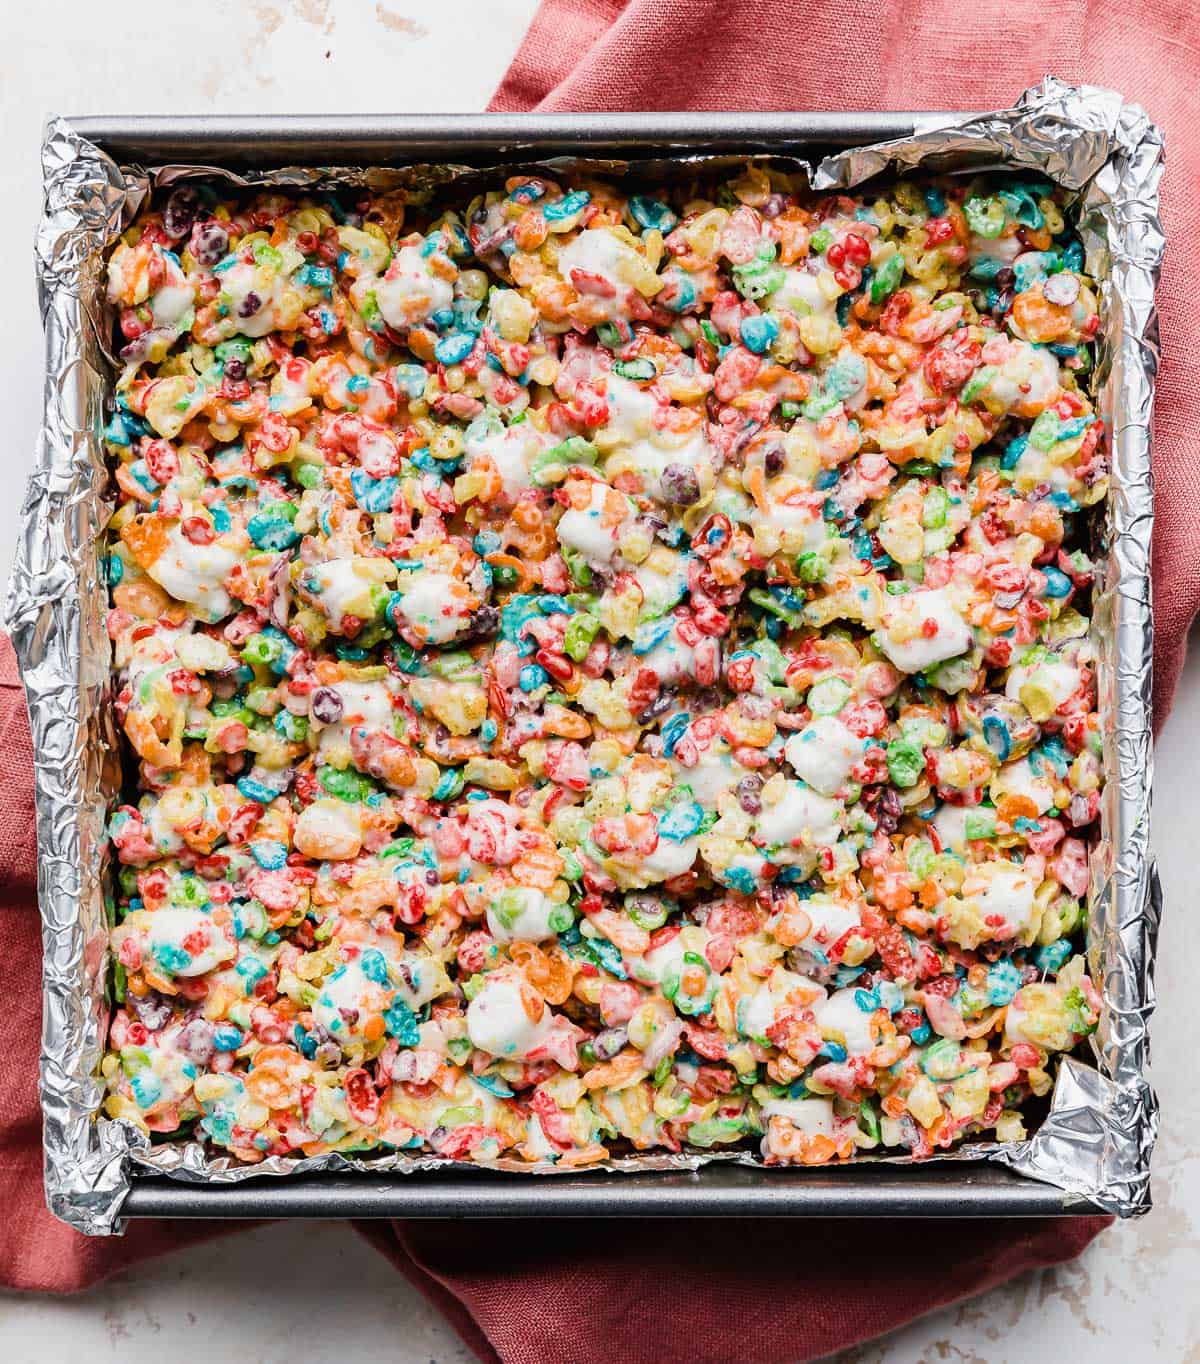 A square pan lined with foil and filled with Fruity Pebble Rice Krispie Treats.